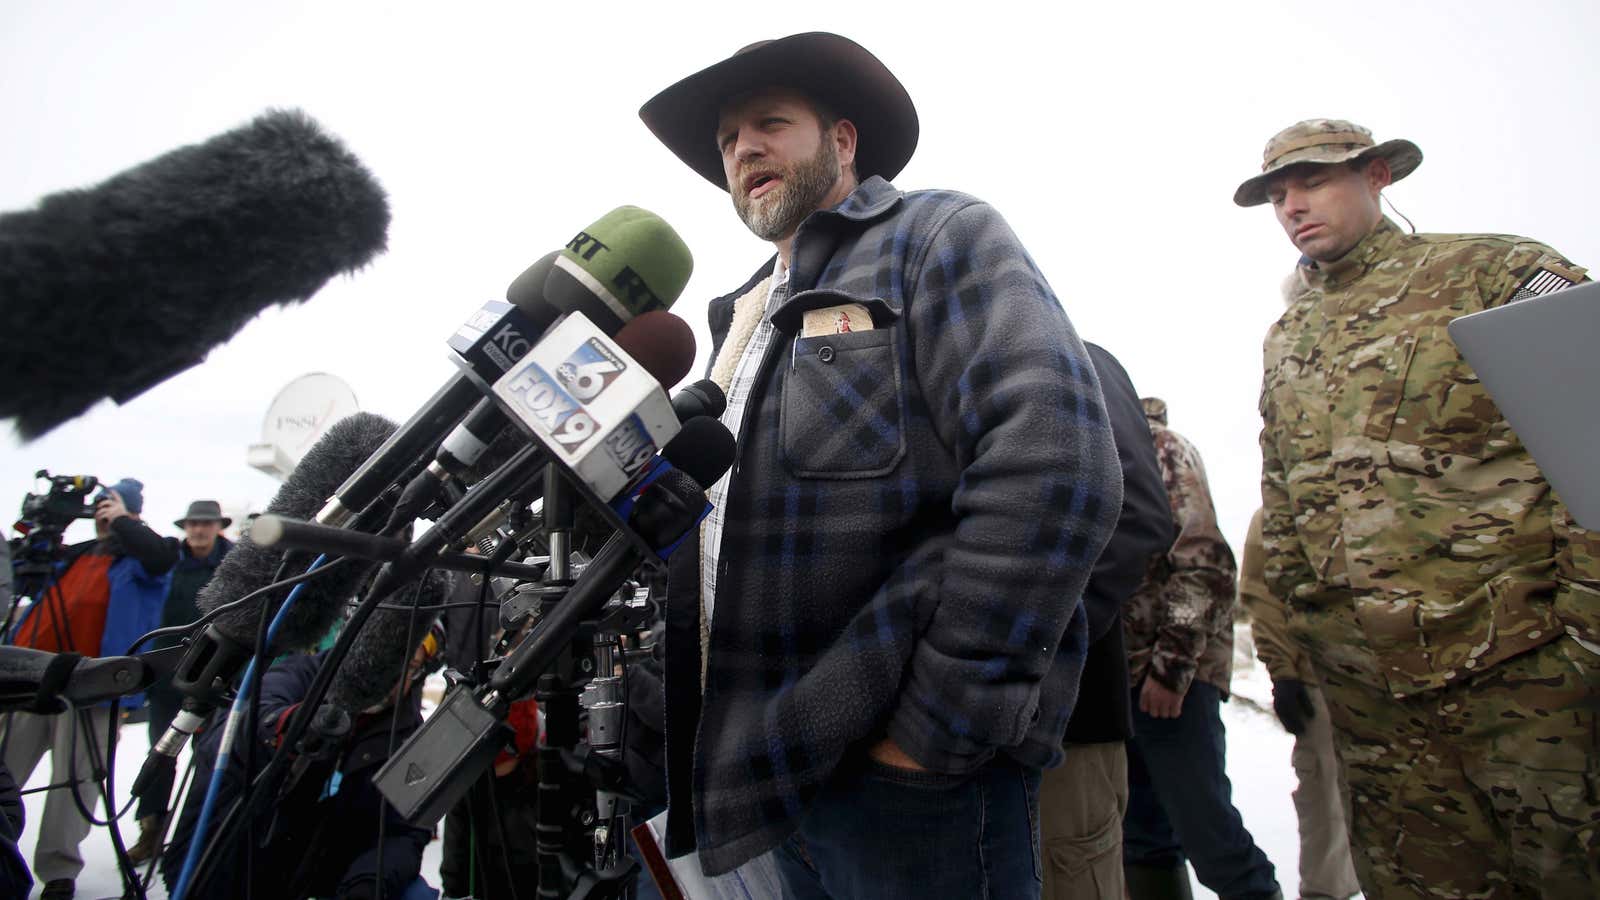 The Bundys’ acquittal stands in contrast to the treatment of Native Americans and others protesting the Dakota Access Pipeline.